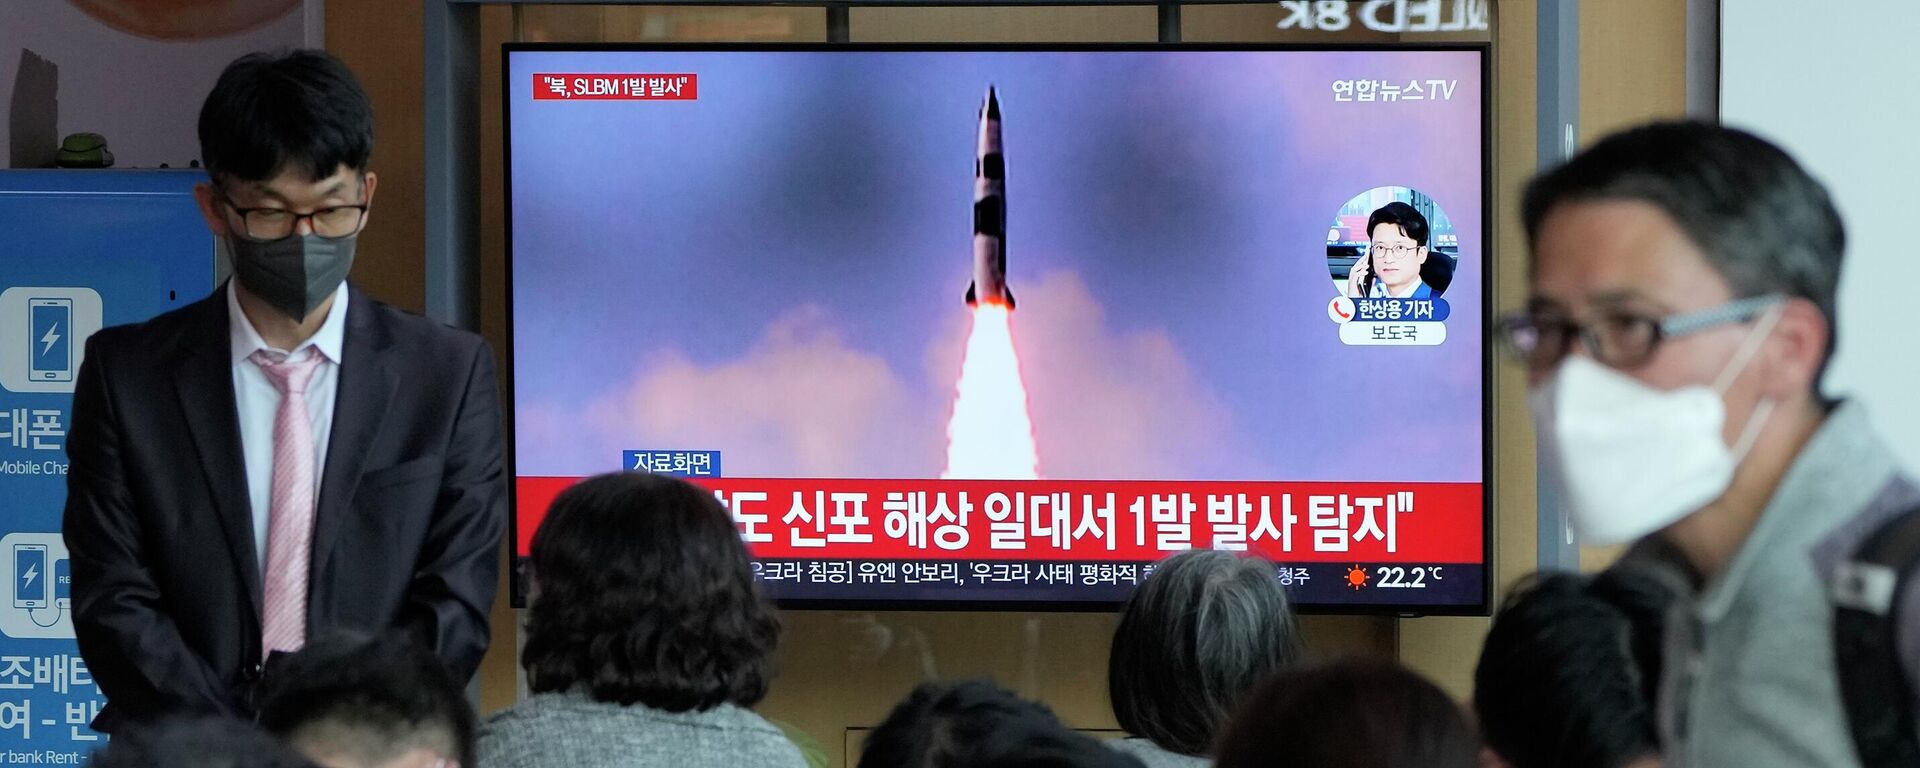 People watch a TV showing a file image of North Korea's missile launch during a news program at the Seoul Railway Station in Seoul, South Korea, Saturday, May 7, 2022. - Sputnik International, 1920, 26.07.2022